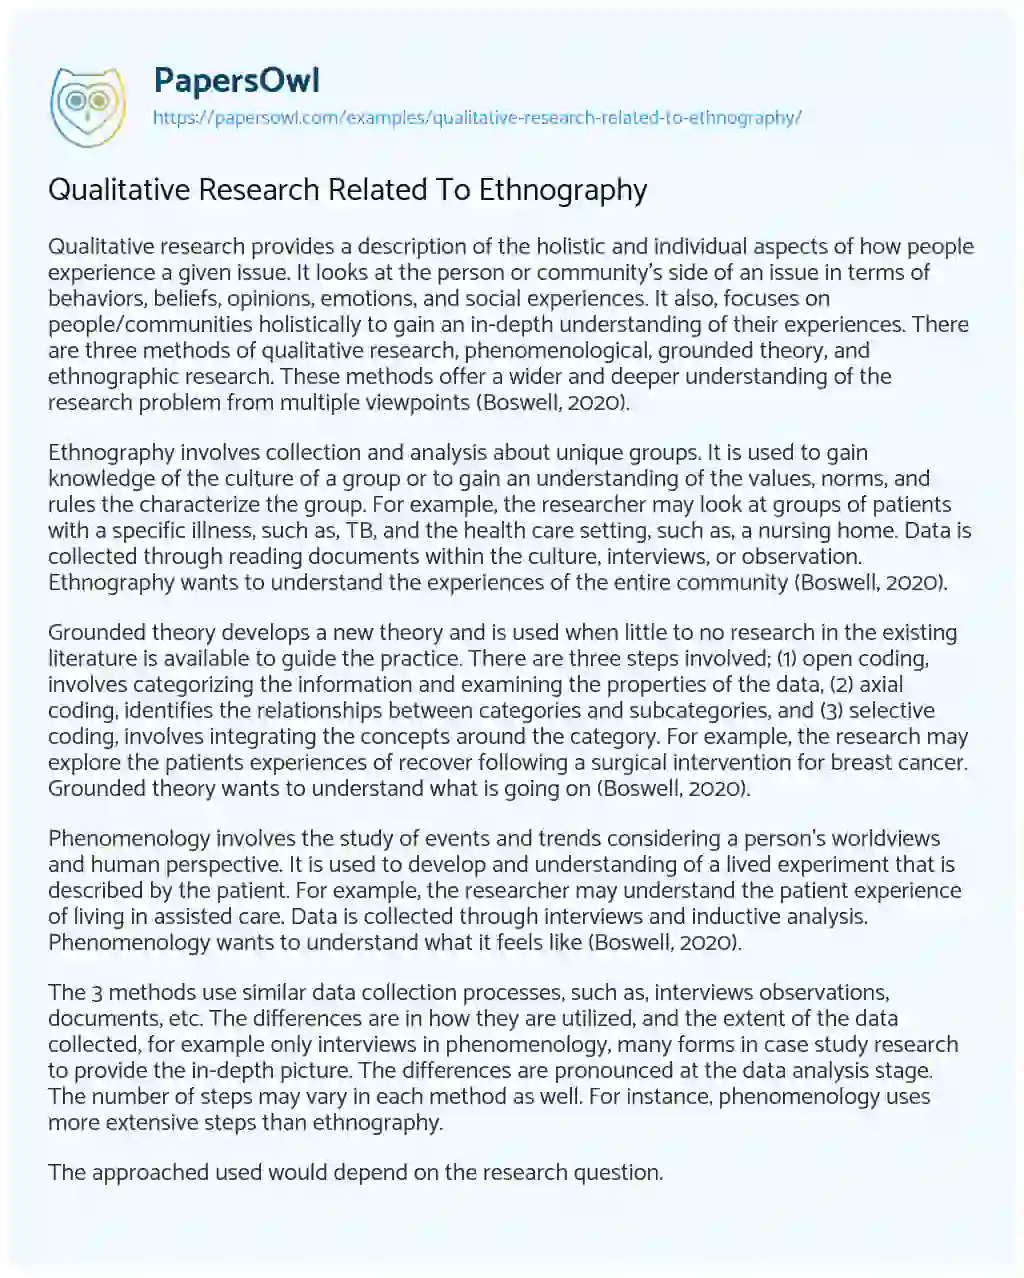 Essay on Qualitative Research Related to Ethnography